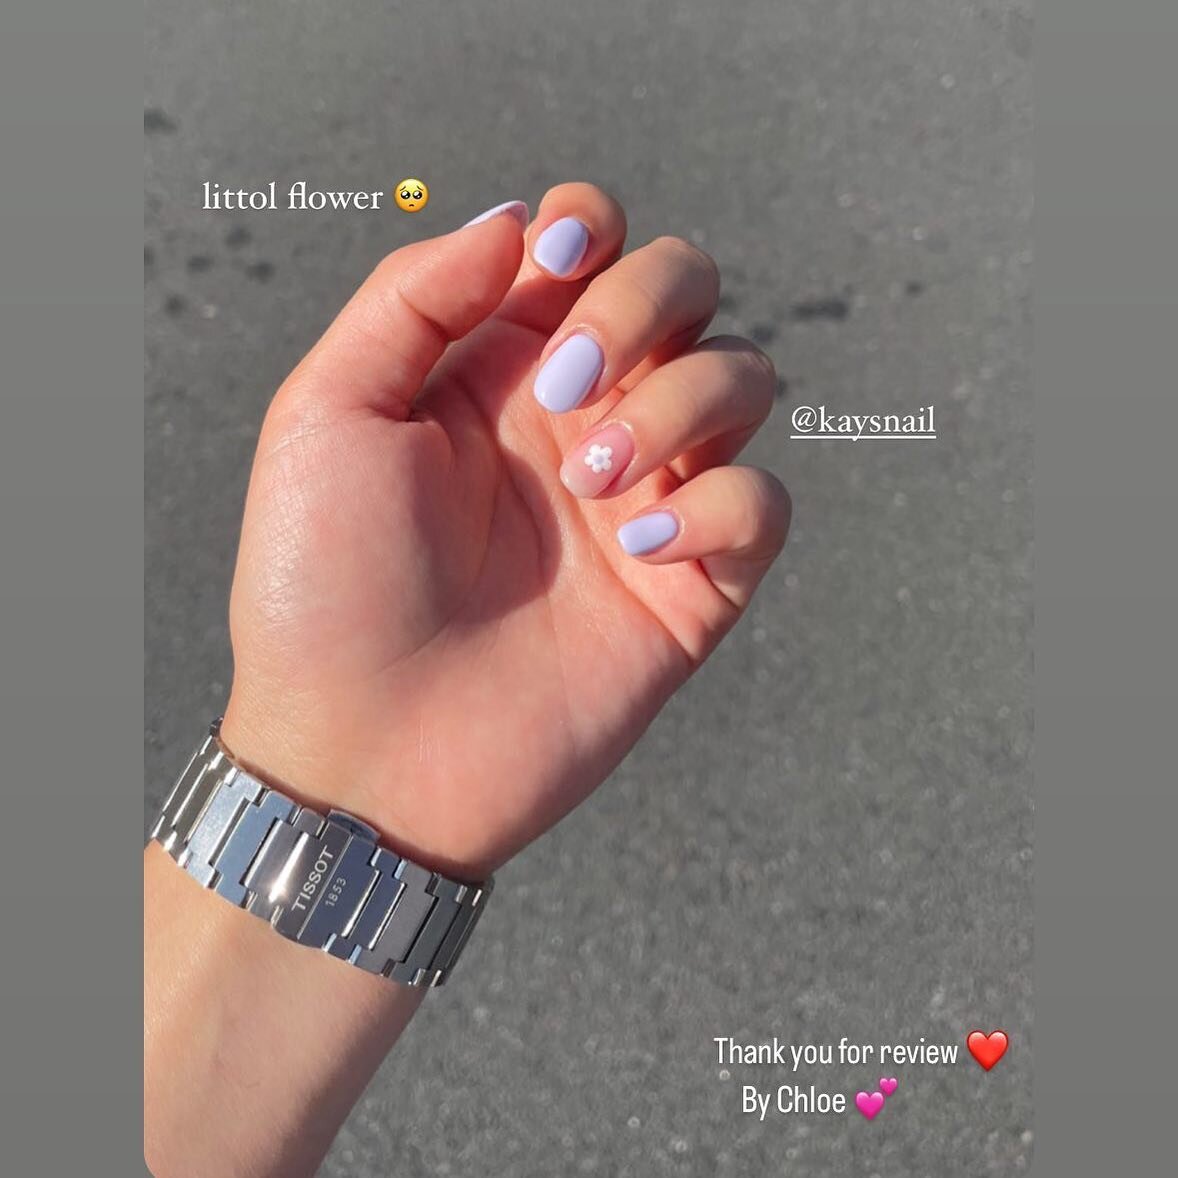 By Chloe 💕
Walk-in Welcome

How to make an appointment. 

1. Please visit website @ www.kaysamazingnails.com
2. Click appointment 

&nbsp; OR

&nbsp; Visit

https://app.acuityscheduling.com/schedule.php?owner=18587191

3.&nbsp; Choose service and te